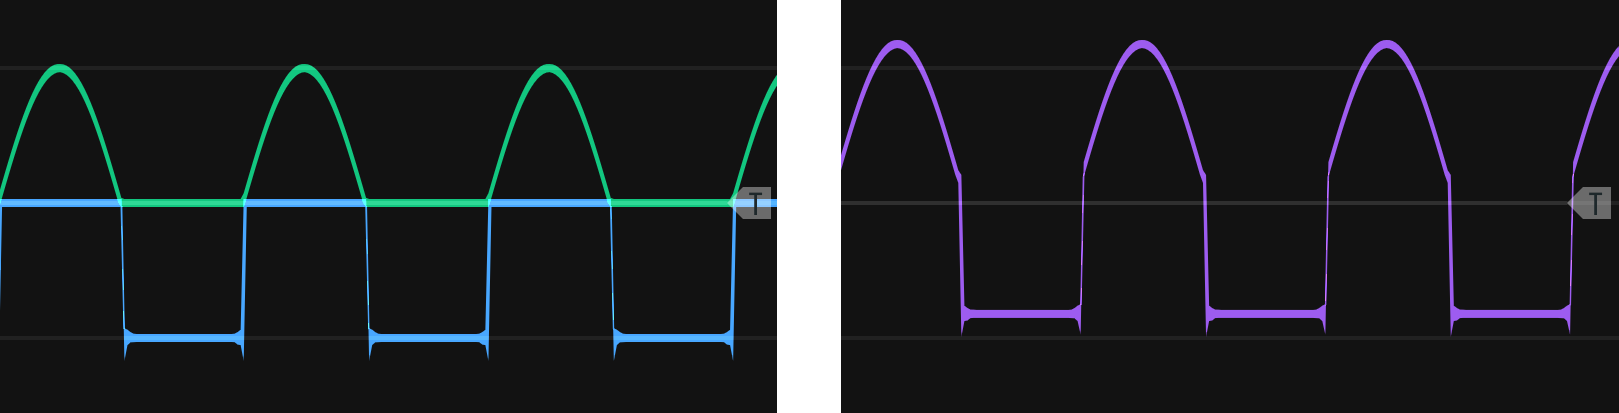 Upper sine wave and lower square wave portions cut using rectification and aligned with a phase offset (left). The final wave is high pass filtered to remove the voltage offset (right).